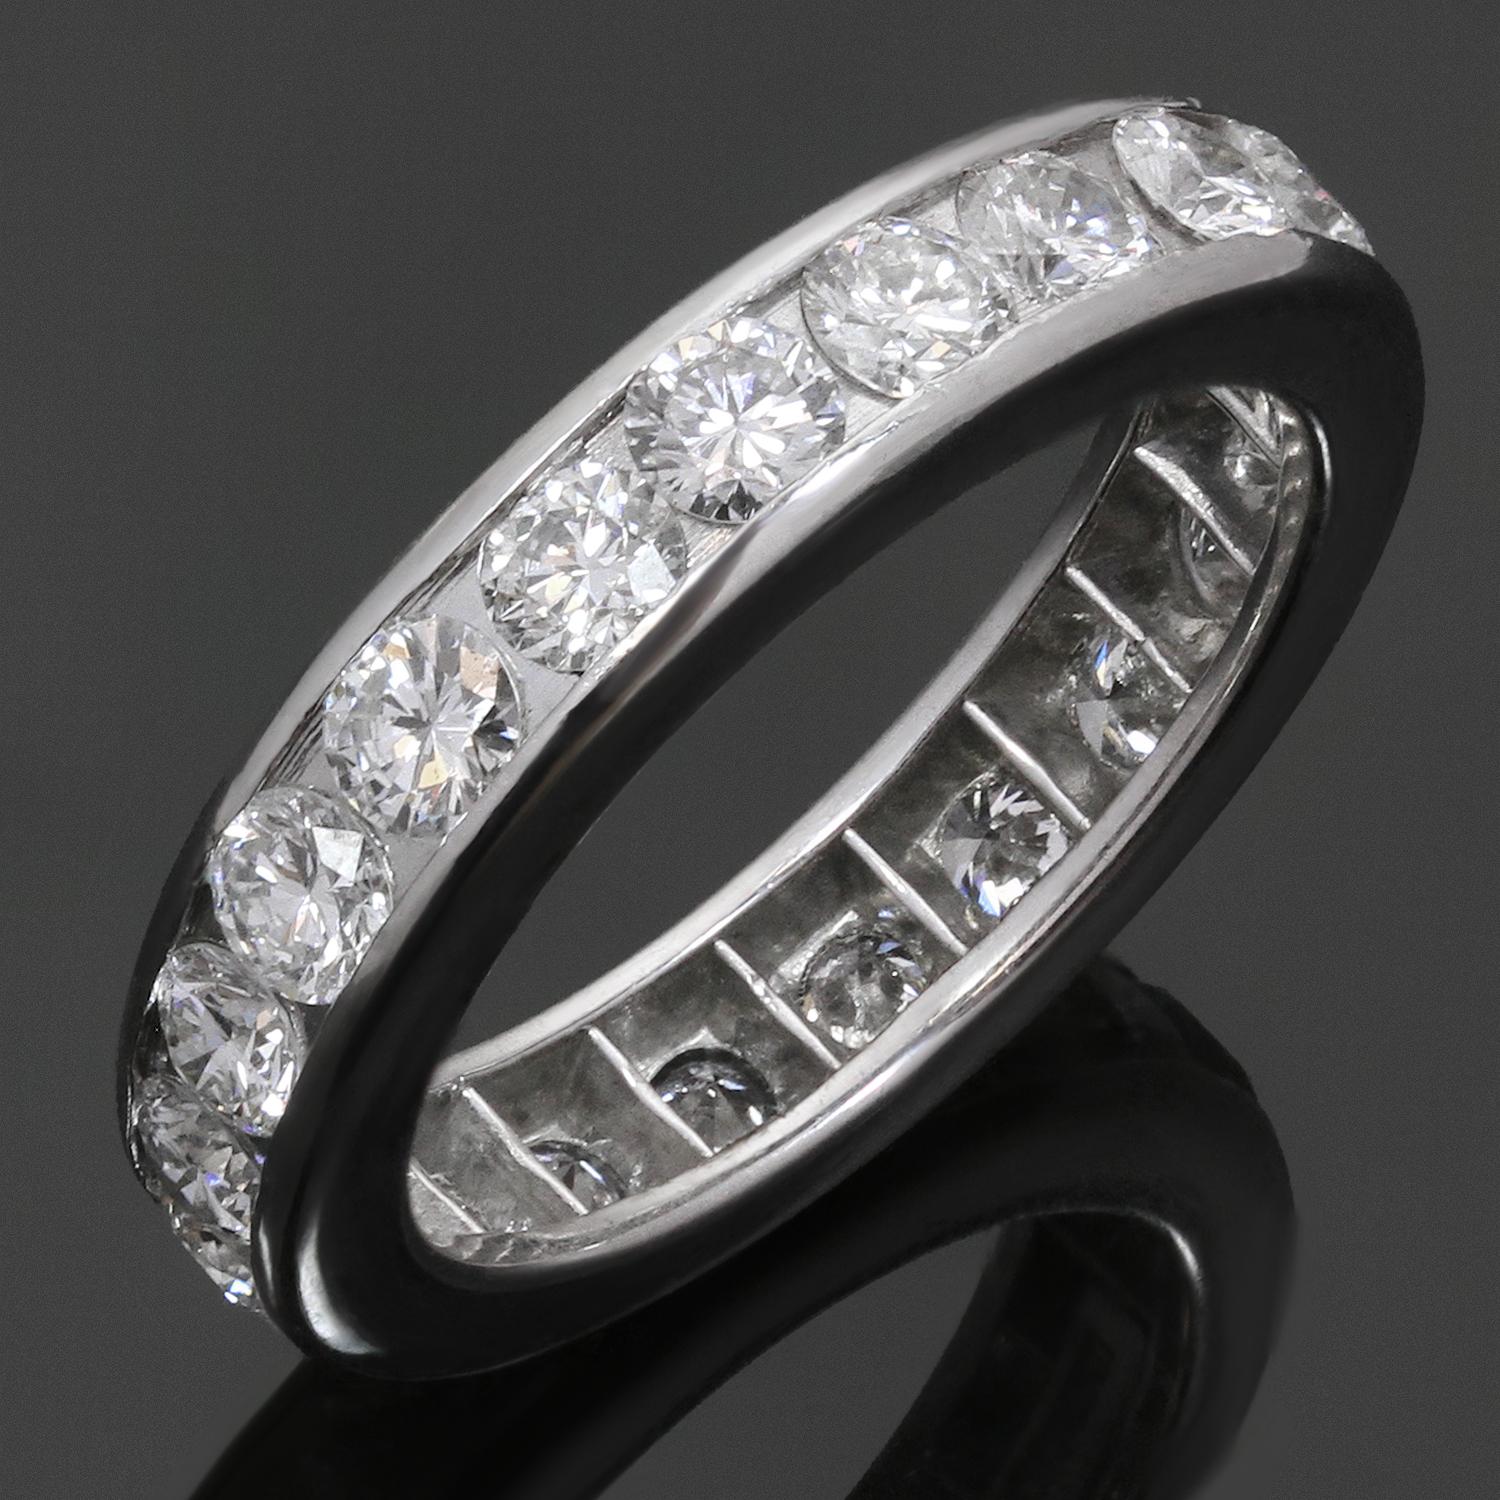 This classic and elegant Tiffany eternity band is crafted in platinum and features a full circle of a full circle of round brilliant-cut diamonds of an estimated 1.85 carats. Made in United States circa 2010s. Measurements: 0.15